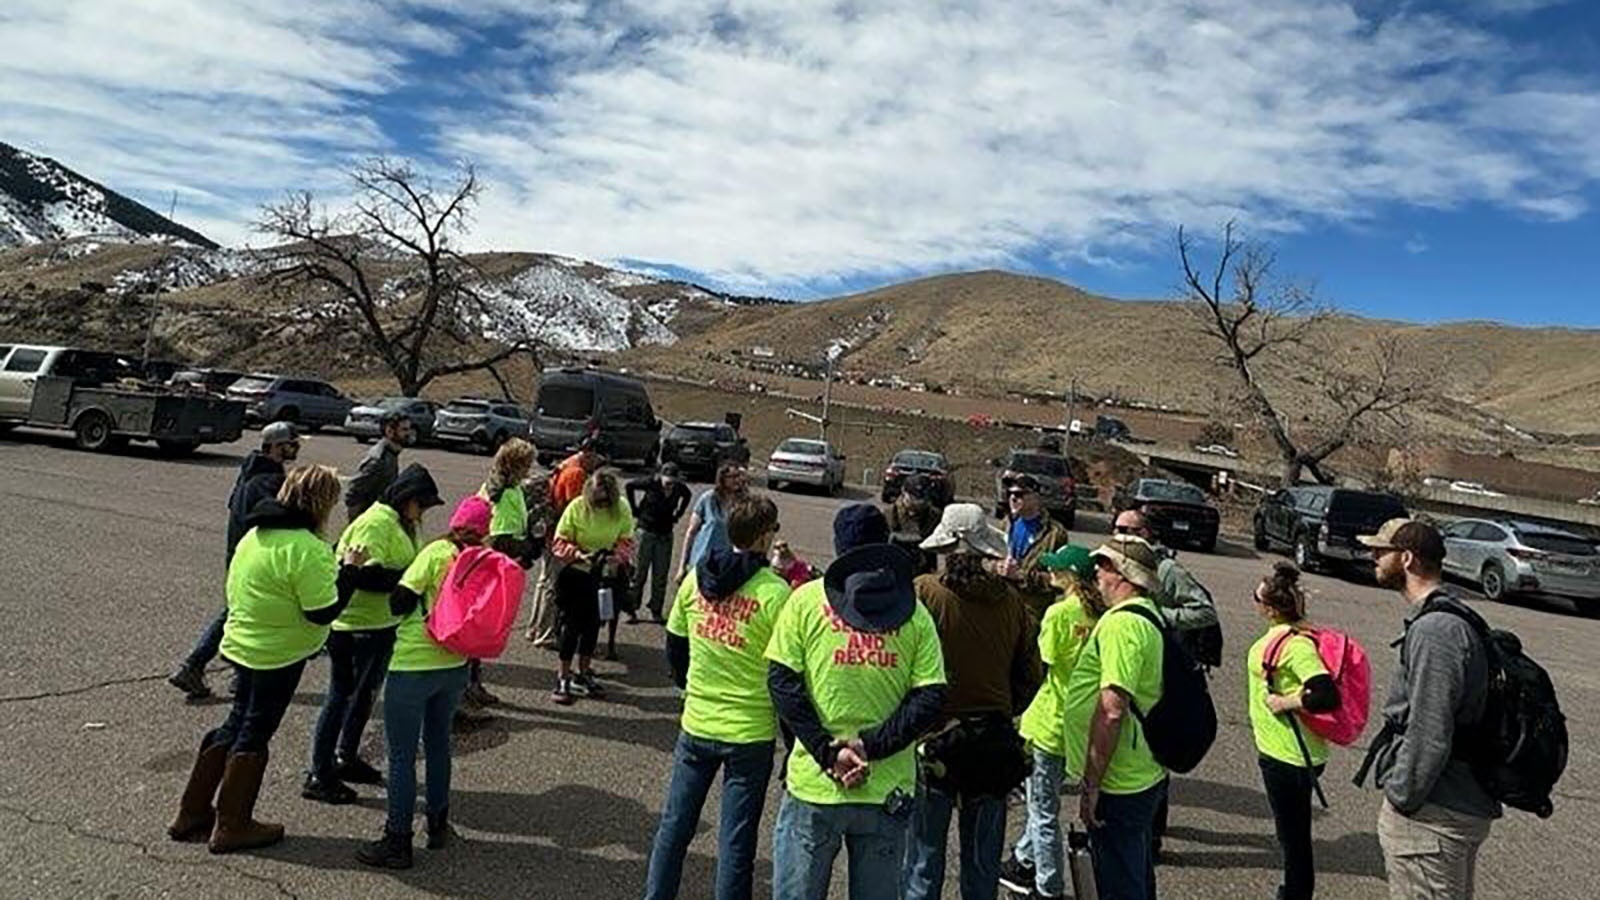 More than 50 volunteers showed up to search for traces of missing person, Nick Salvagni, whose abandoned vehicle was found at a park and ride site in Golden, Colorado.